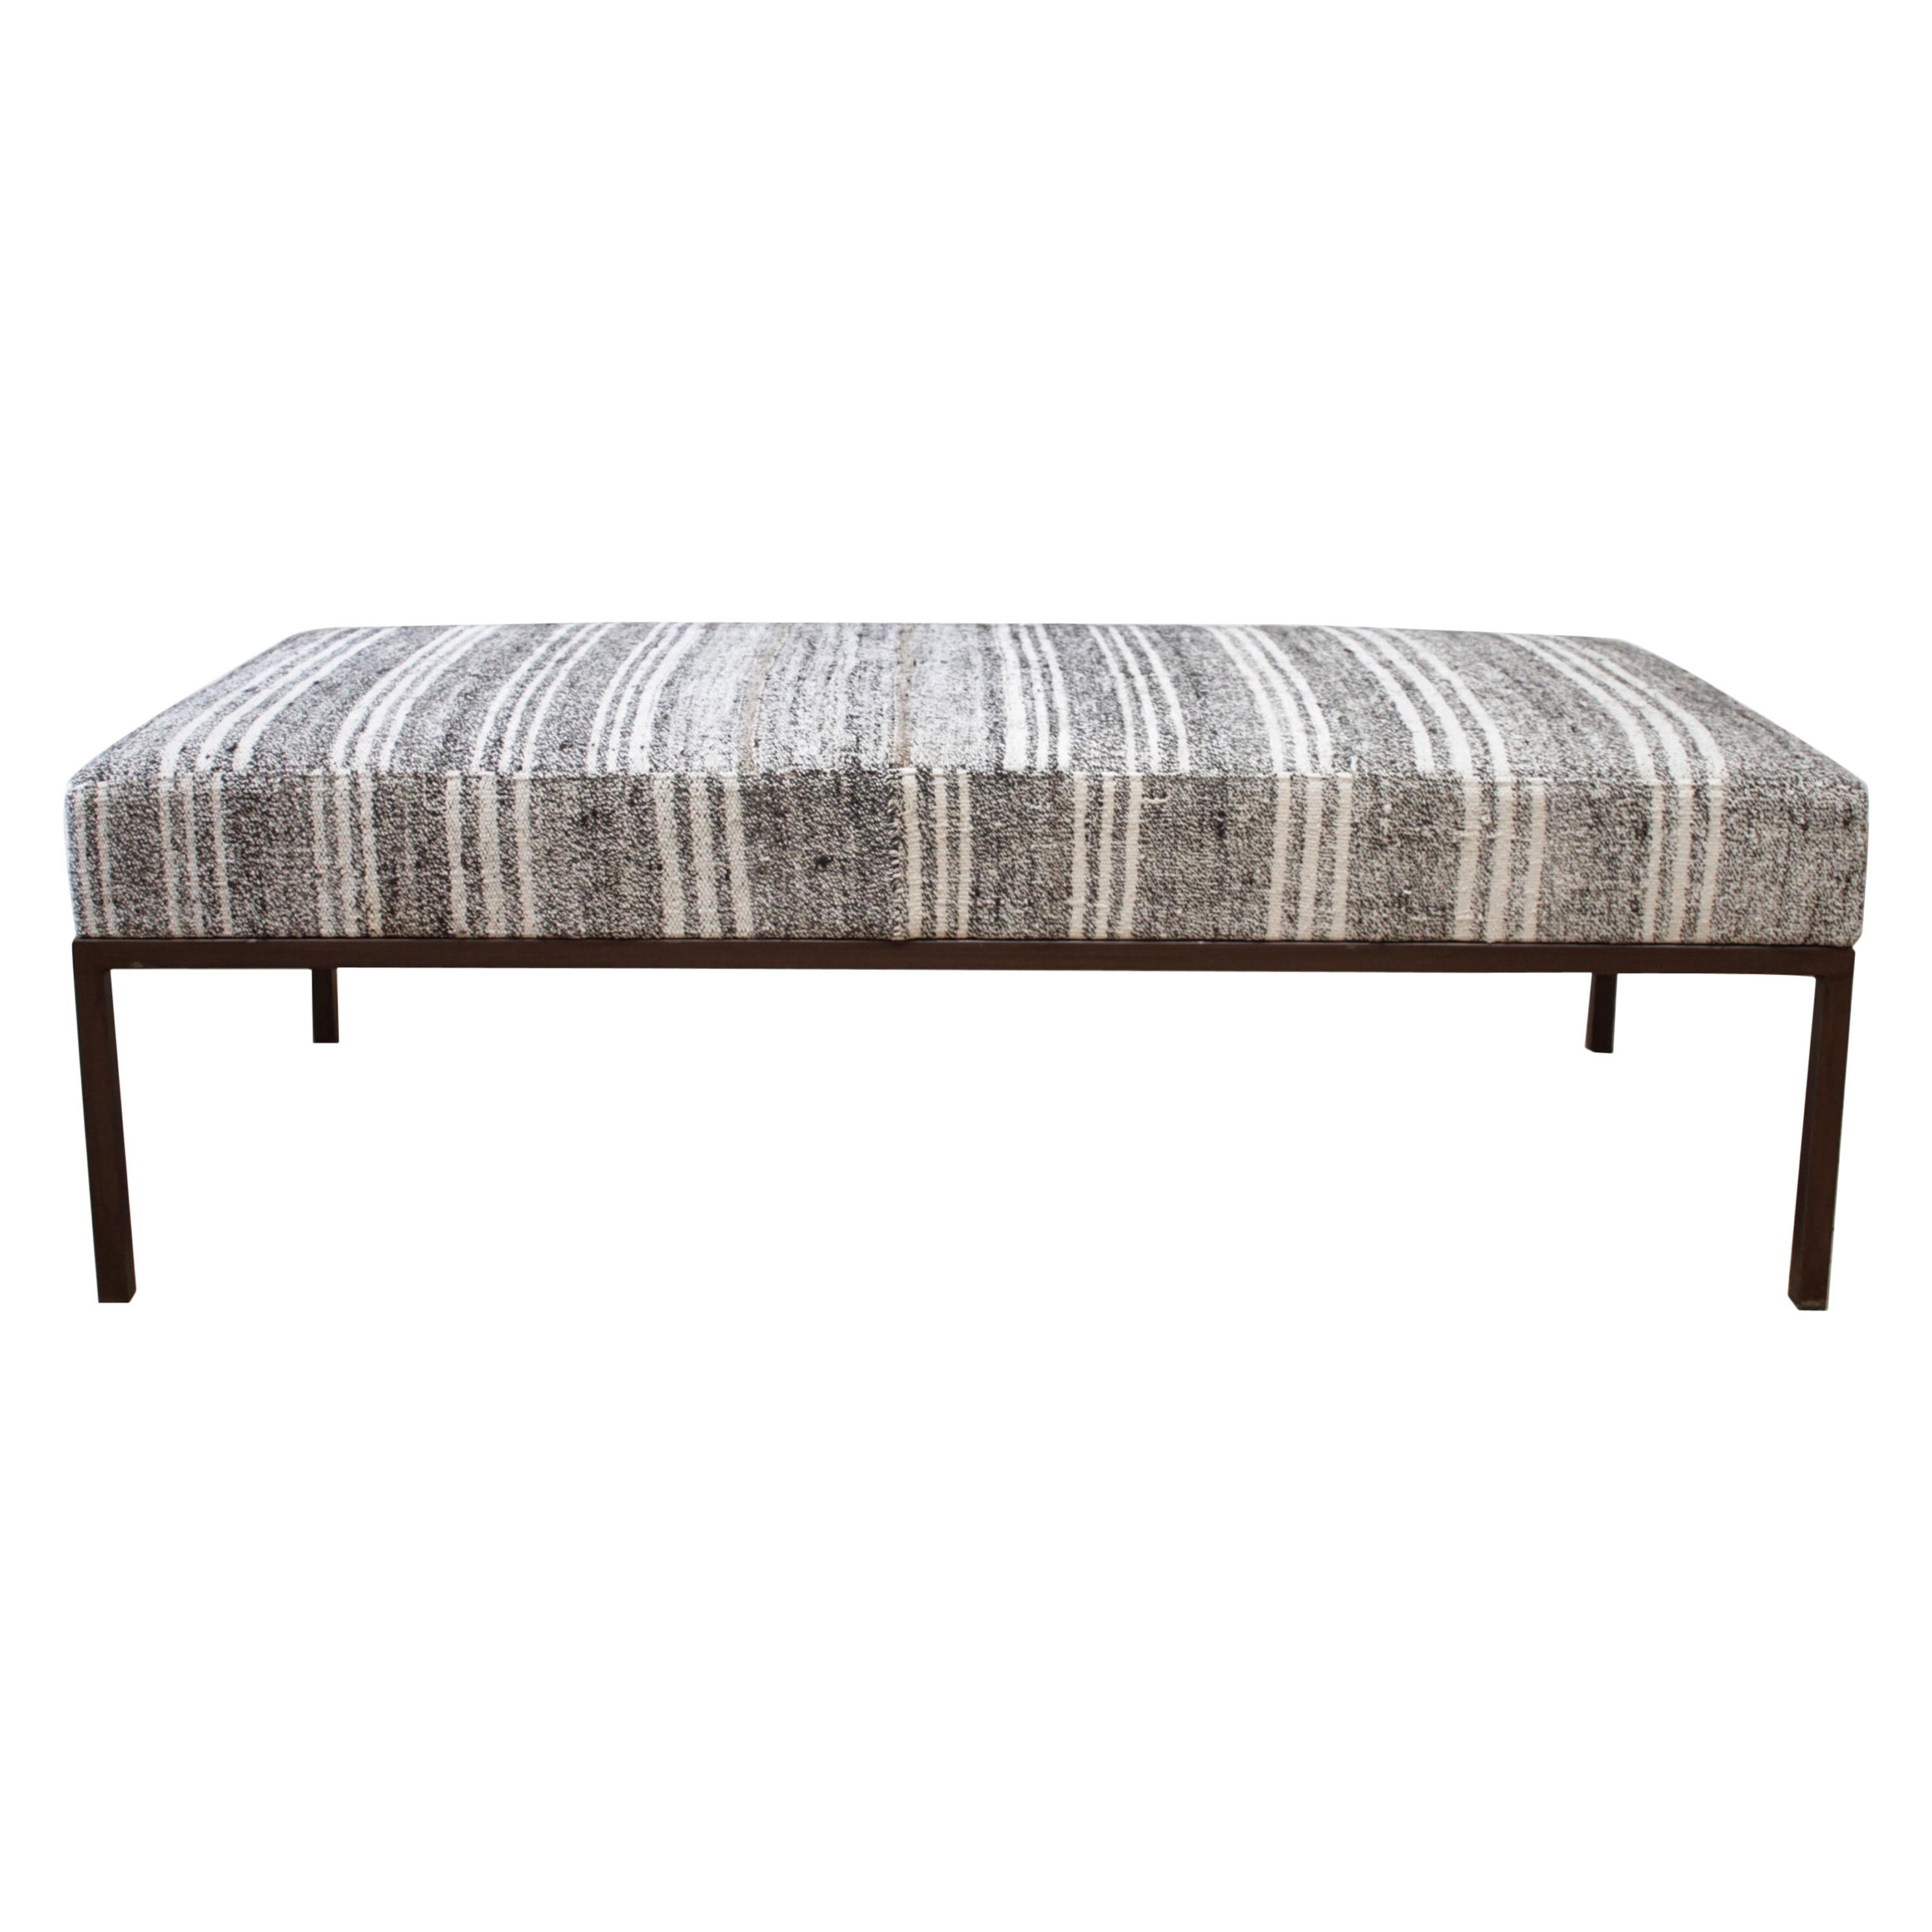 Custom Made Iron Upholstered Cocktail Table Bench Ottoman